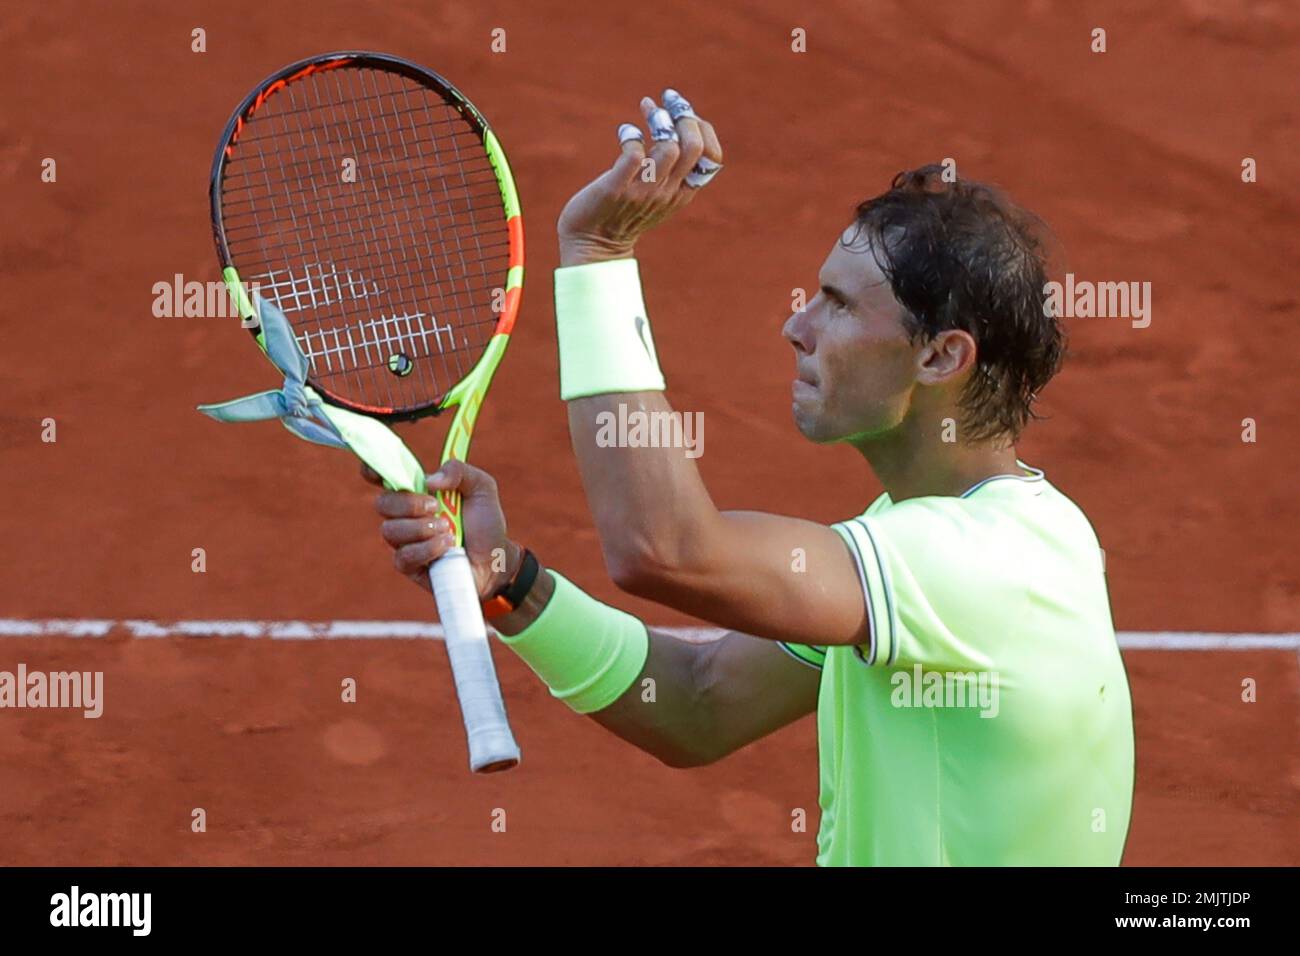 Spains Rafael Nadal celebrates winning his third round match of the French Open tennis tournament against Belgiums David Goffin in four sets, 6-1, 6-3, 4-6, 6-3, at the Roland Garros stadium in